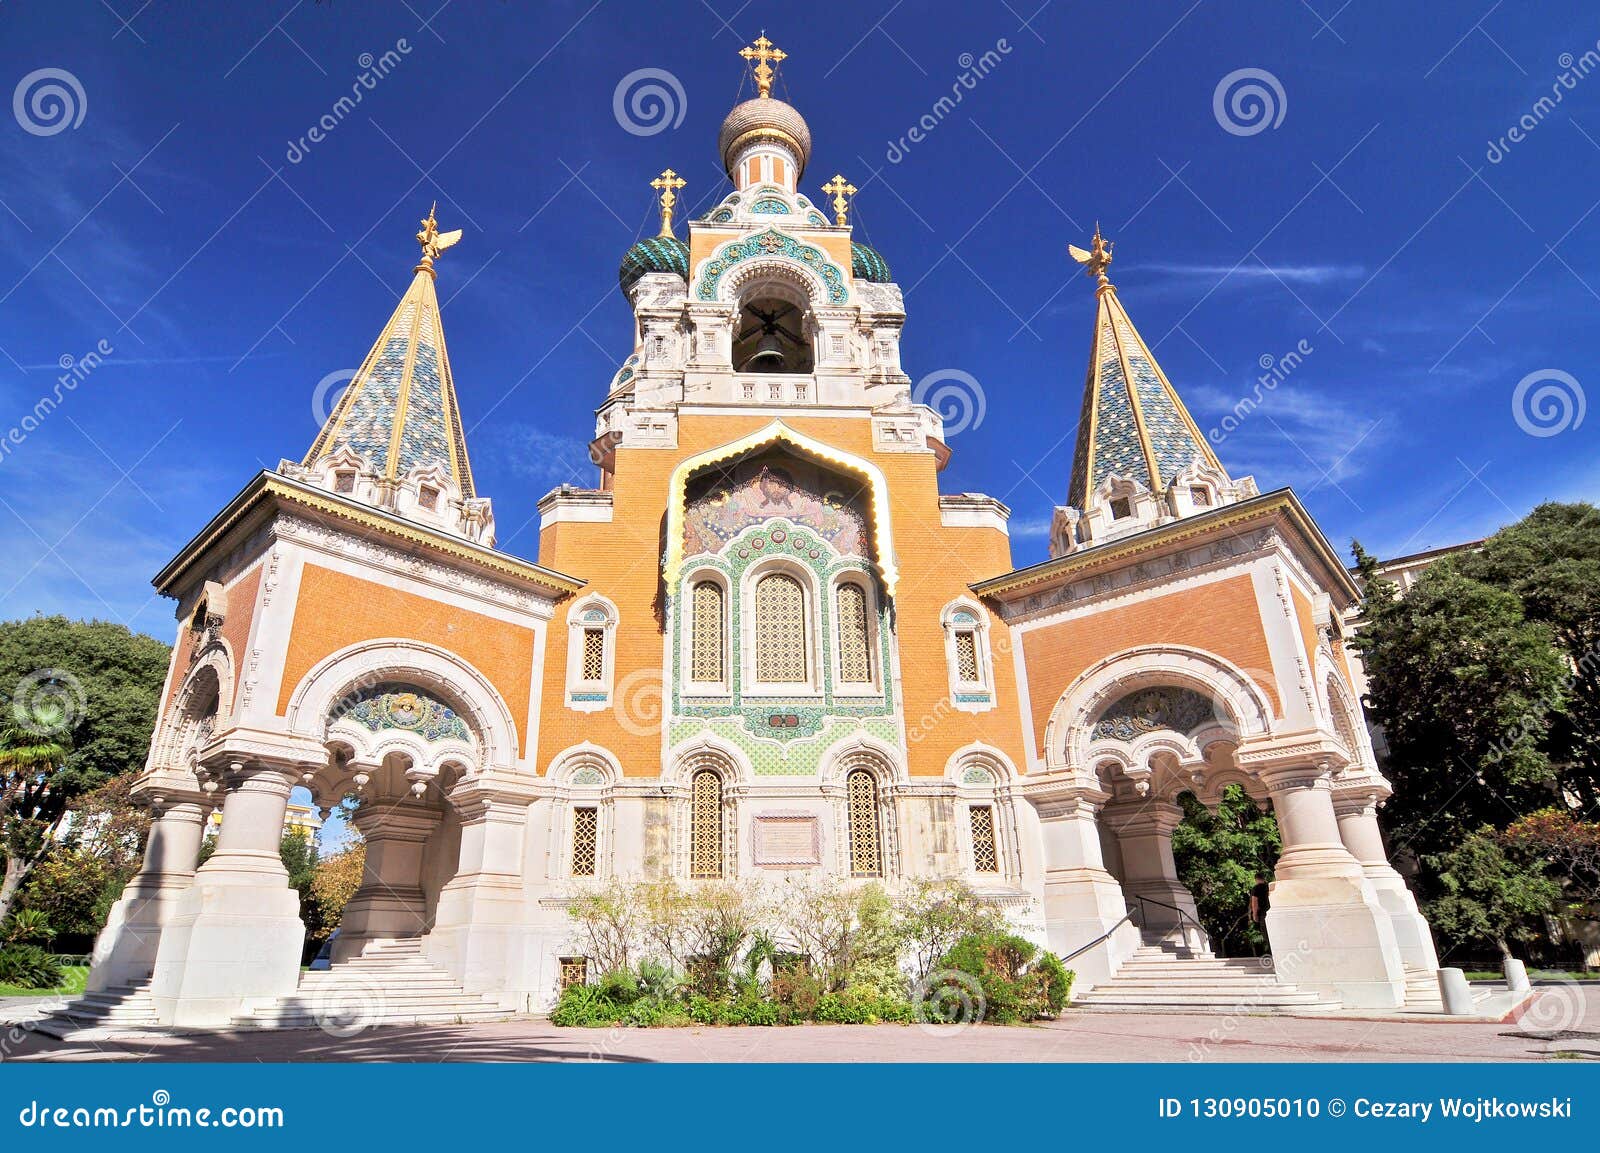 Cathedrale Orthodoxe Russe Saint Nicolas De Nice, the Russian 